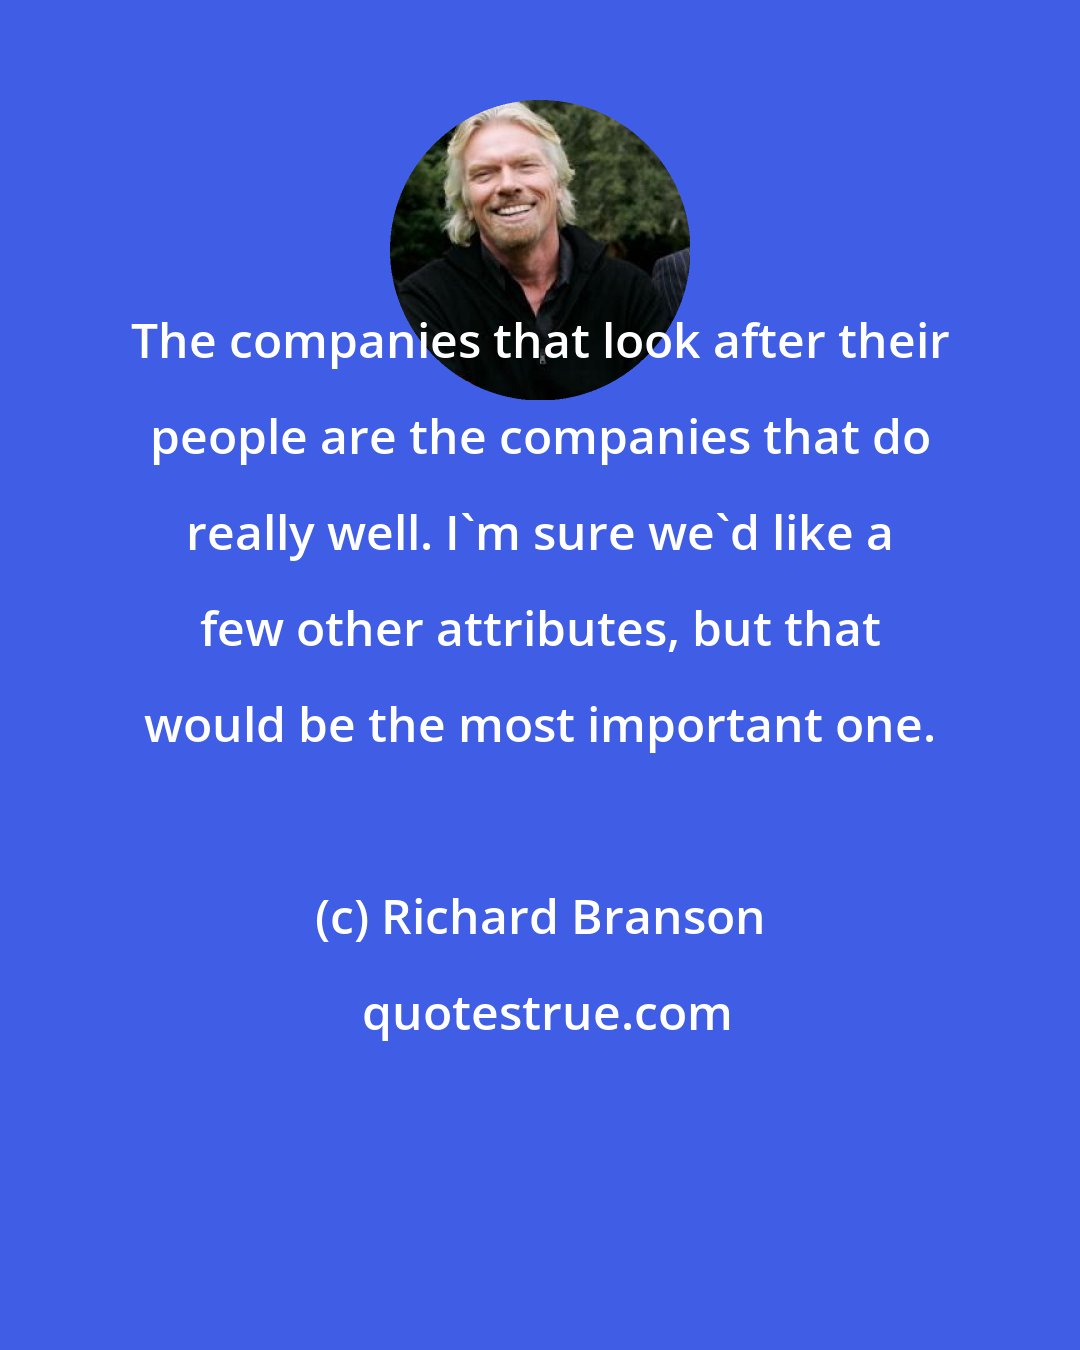 Richard Branson: The companies that look after their people are the companies that do really well. I'm sure we'd like a few other attributes, but that would be the most important one.